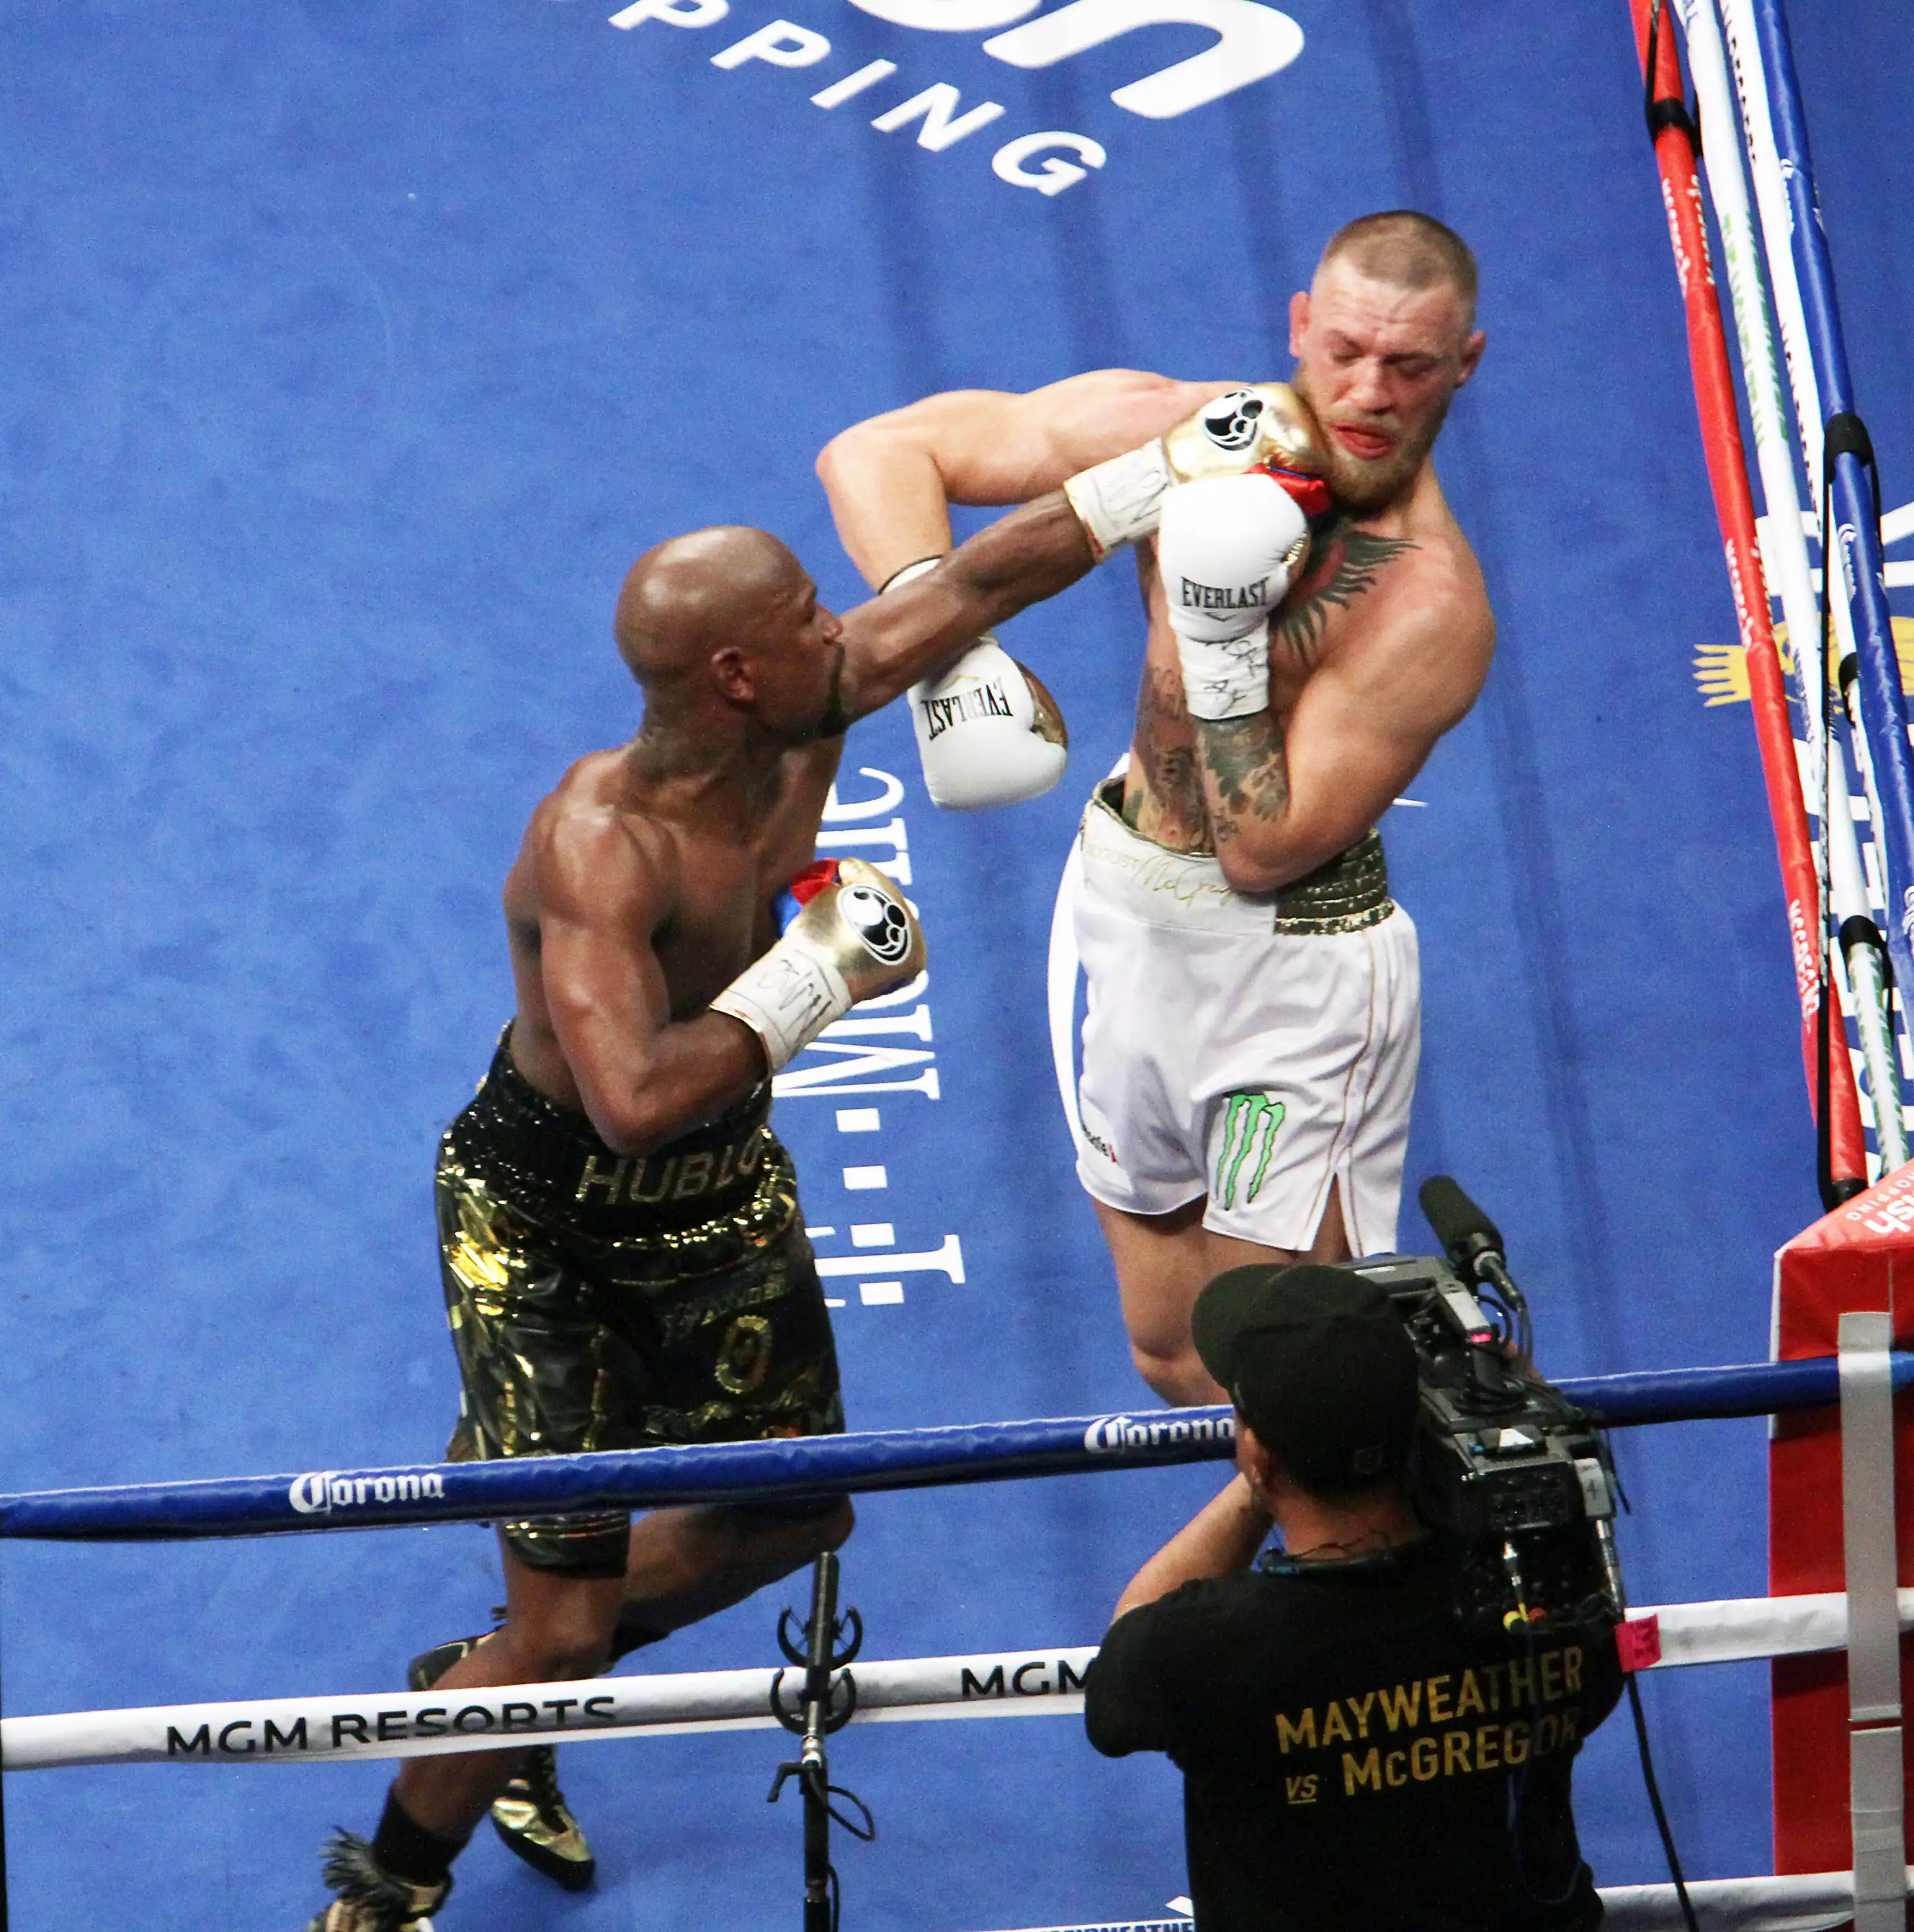 McGregor's last performance was the loss against Mayweather. Image: PA Images